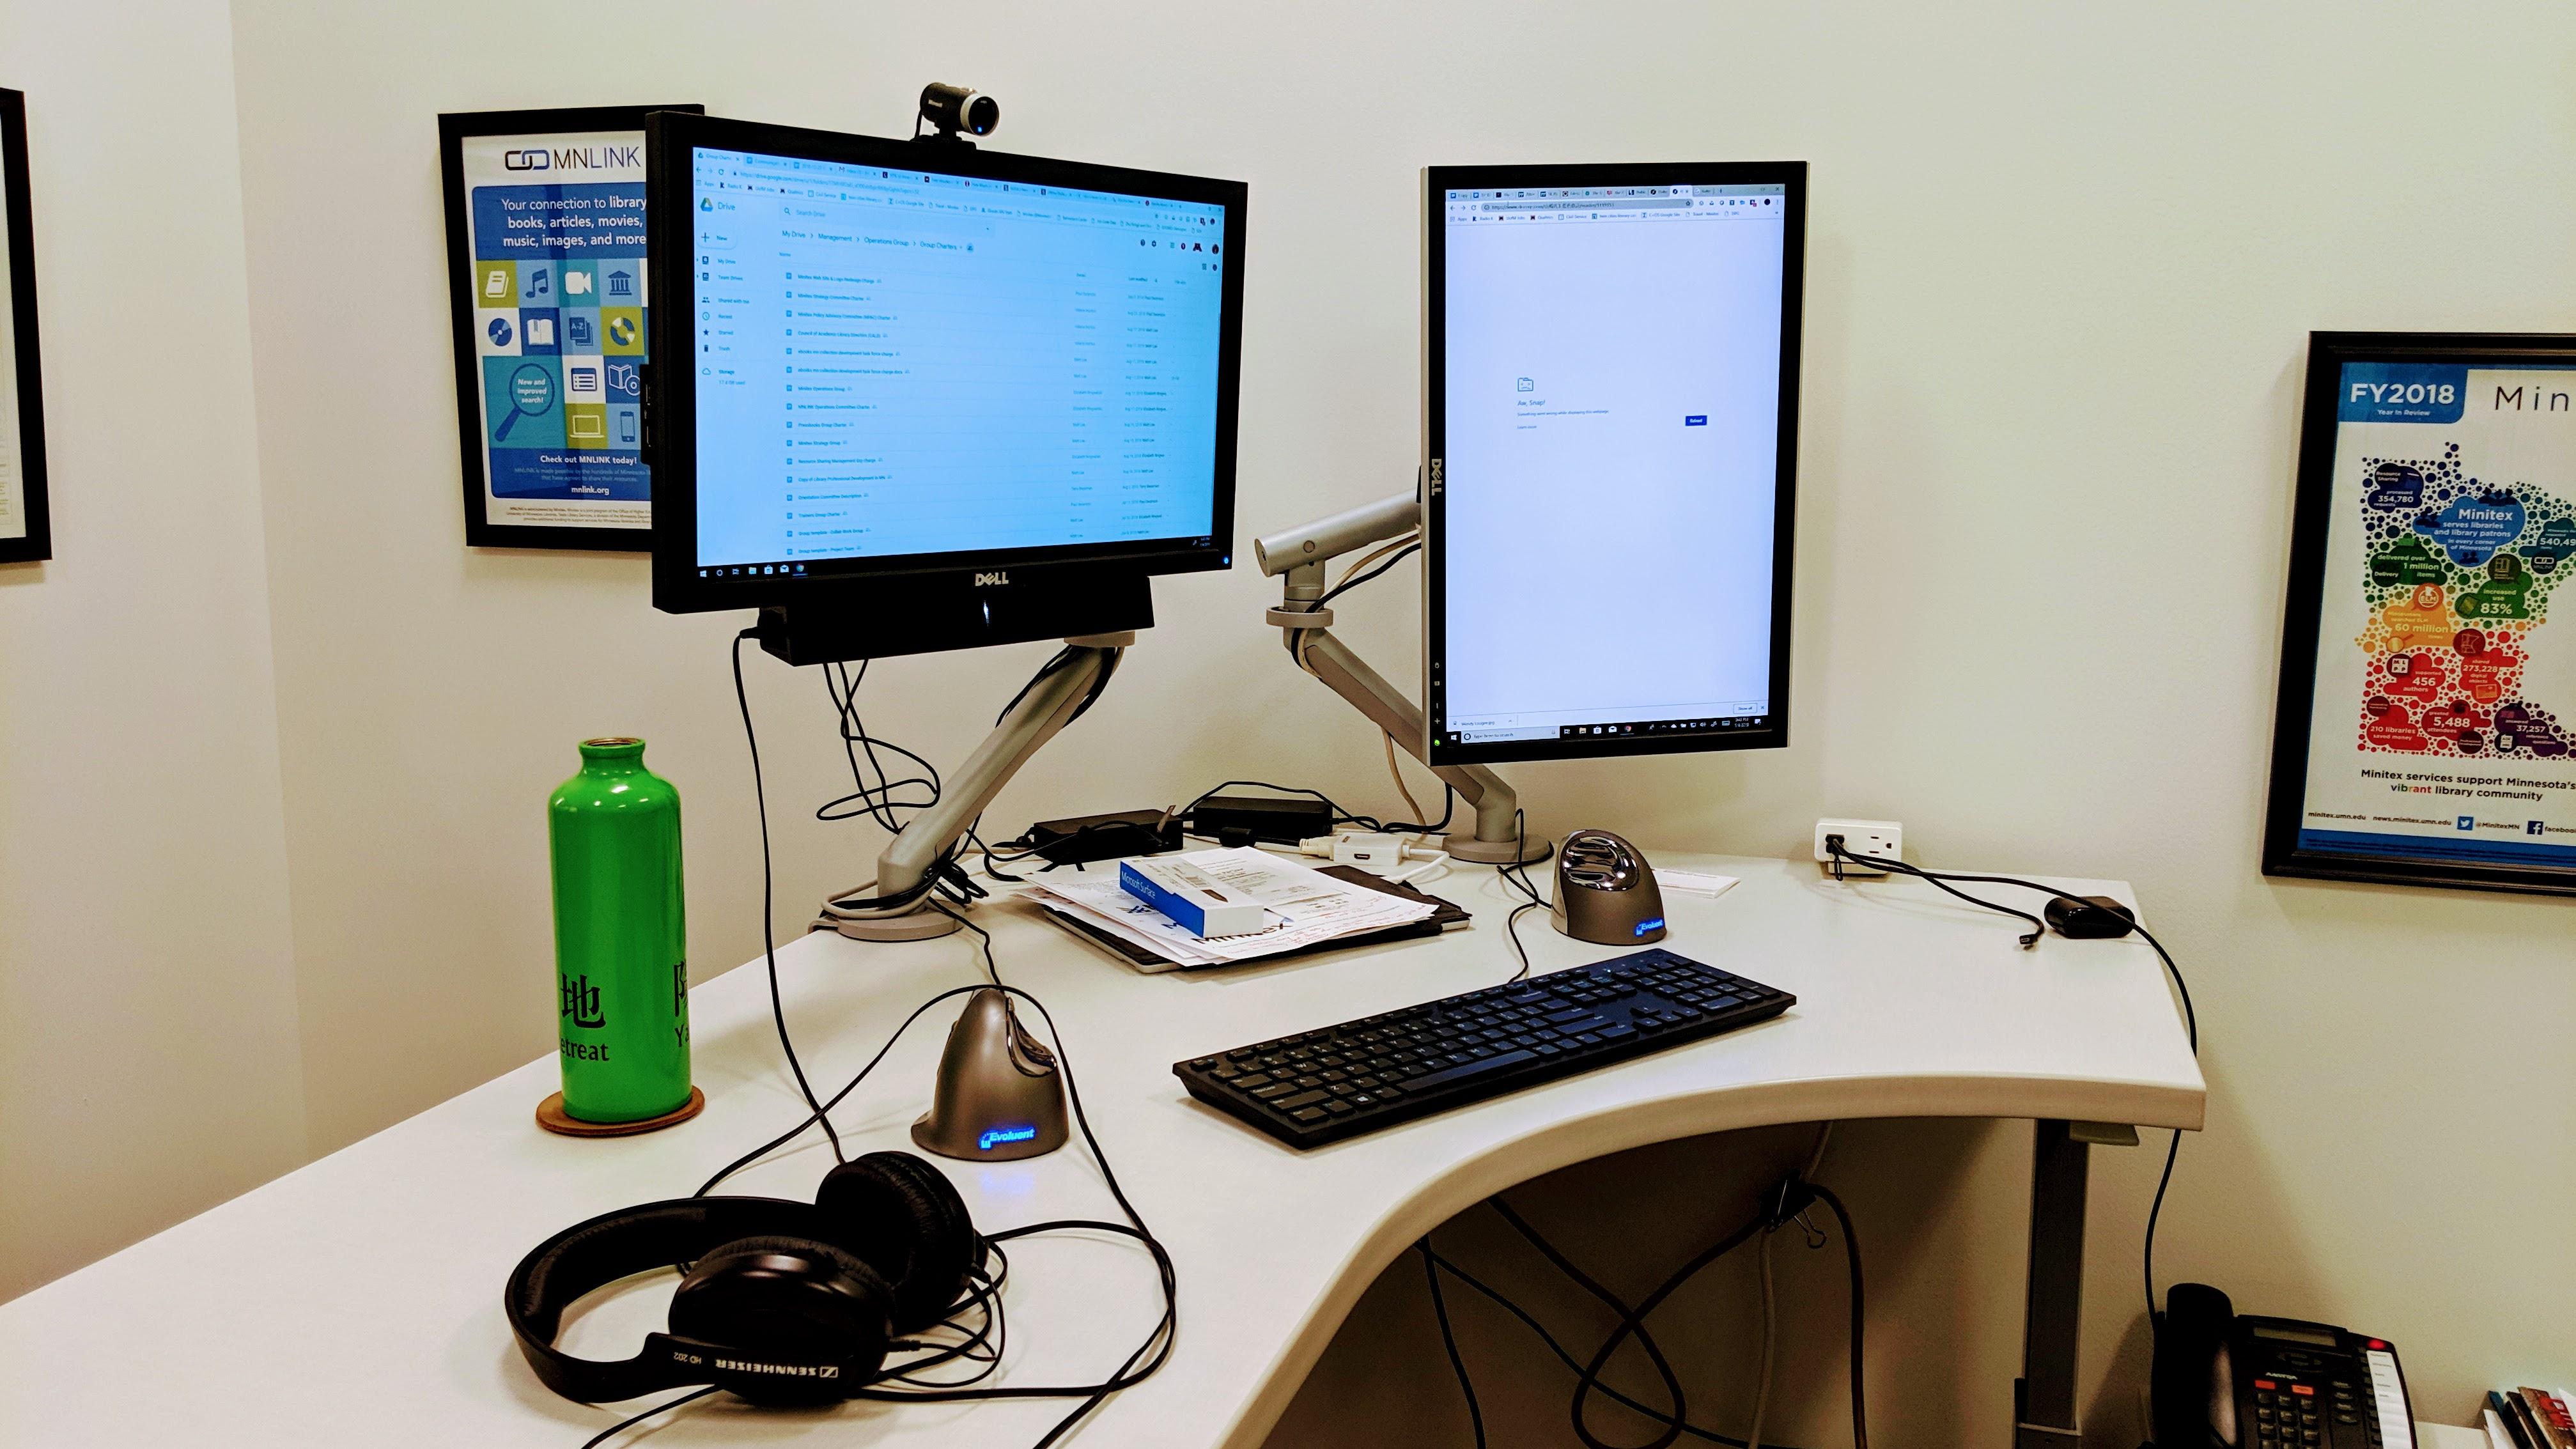 A photograph of computer equipment on a desk.